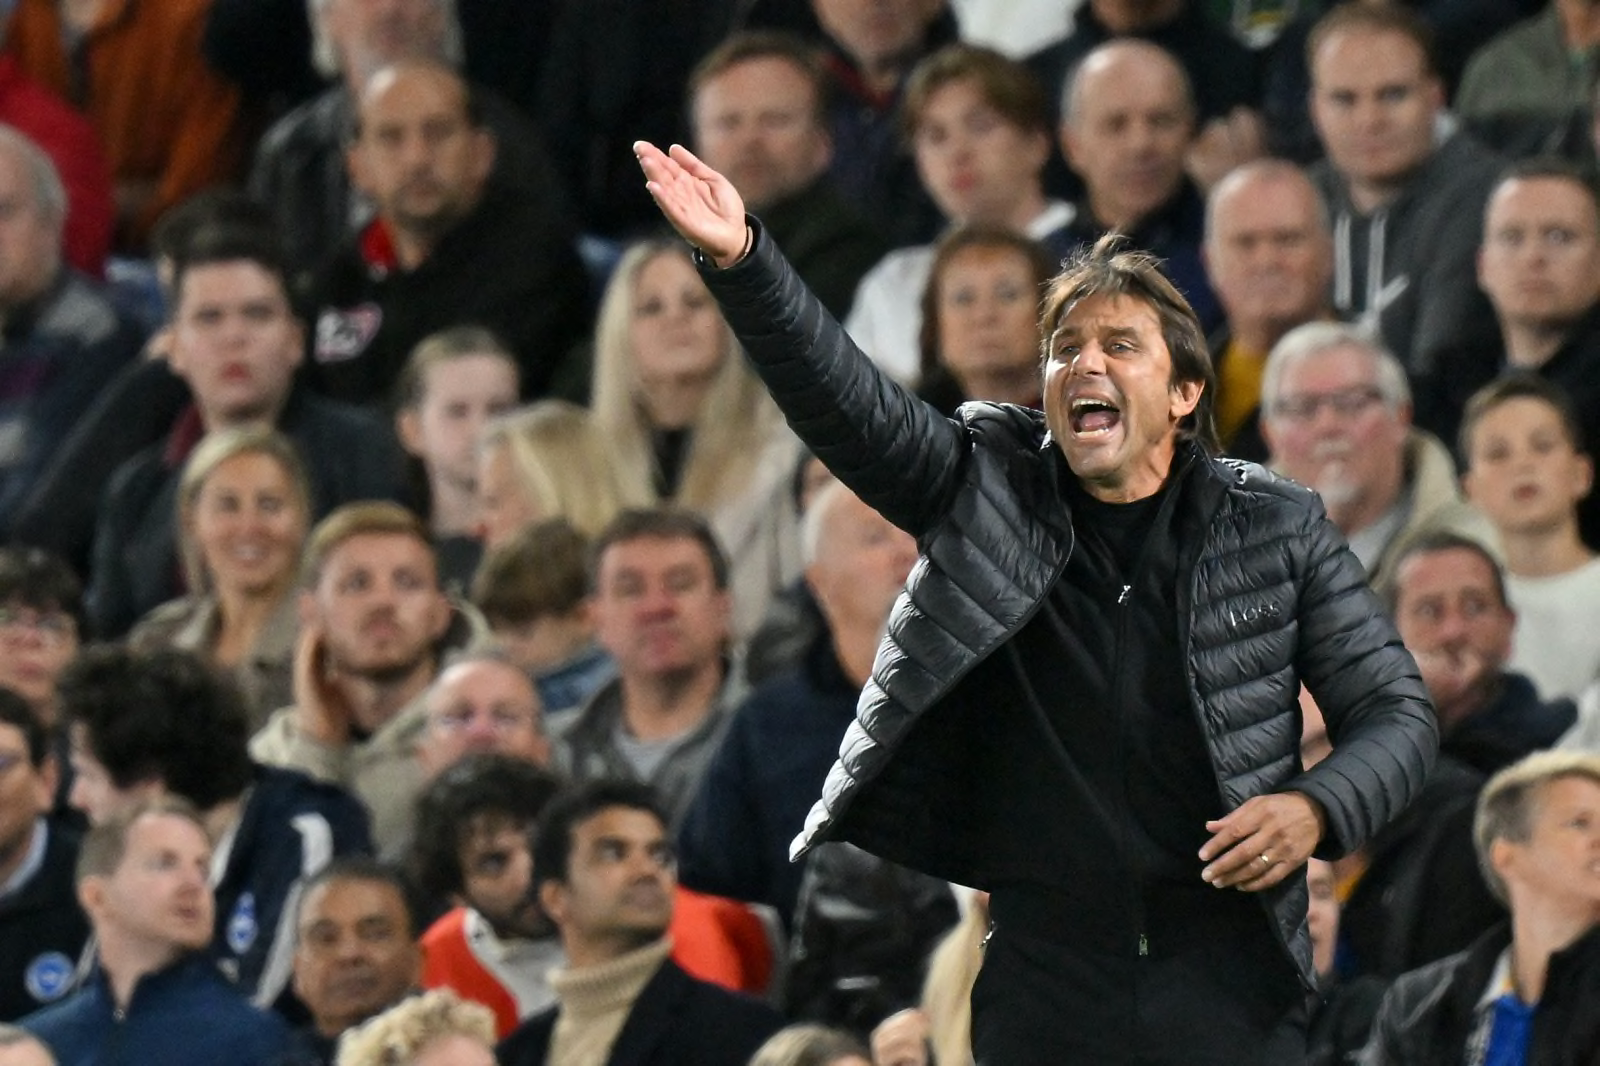 Tottenham Hotspur's Italian head coach Antonio Conte reacts during the English Premier League football match between Brighton and Hove Albion and Tottenham Hotspur at the American Express Community Stadium in Brighton, southern England on October 8, 2022. - (Photo by GLYN KIRK/AFP via Getty Images)